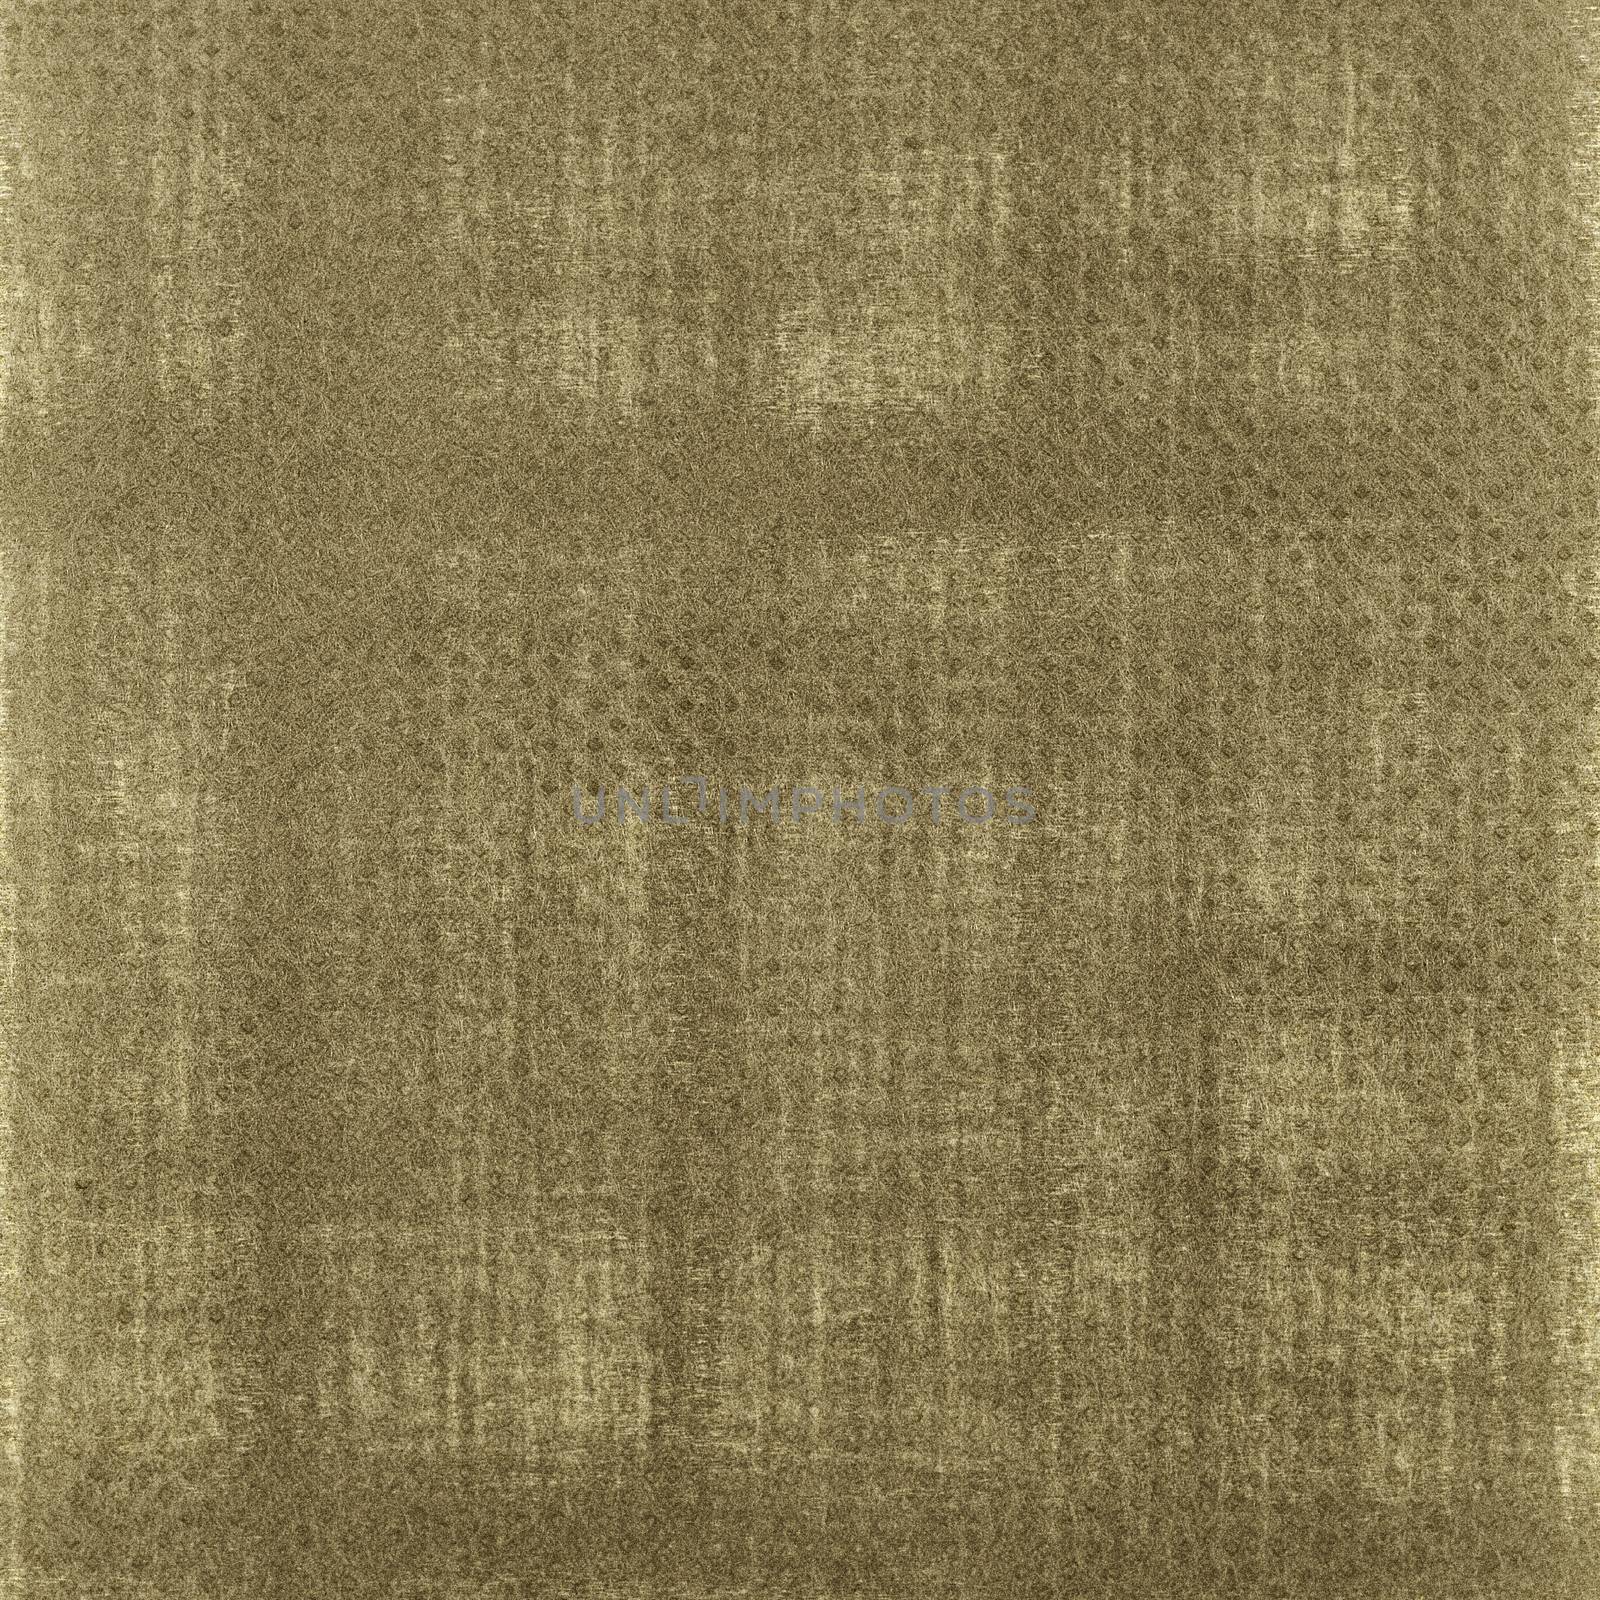 Grey background, vintage grunge background texture abstract for printing brochure, web design pattern